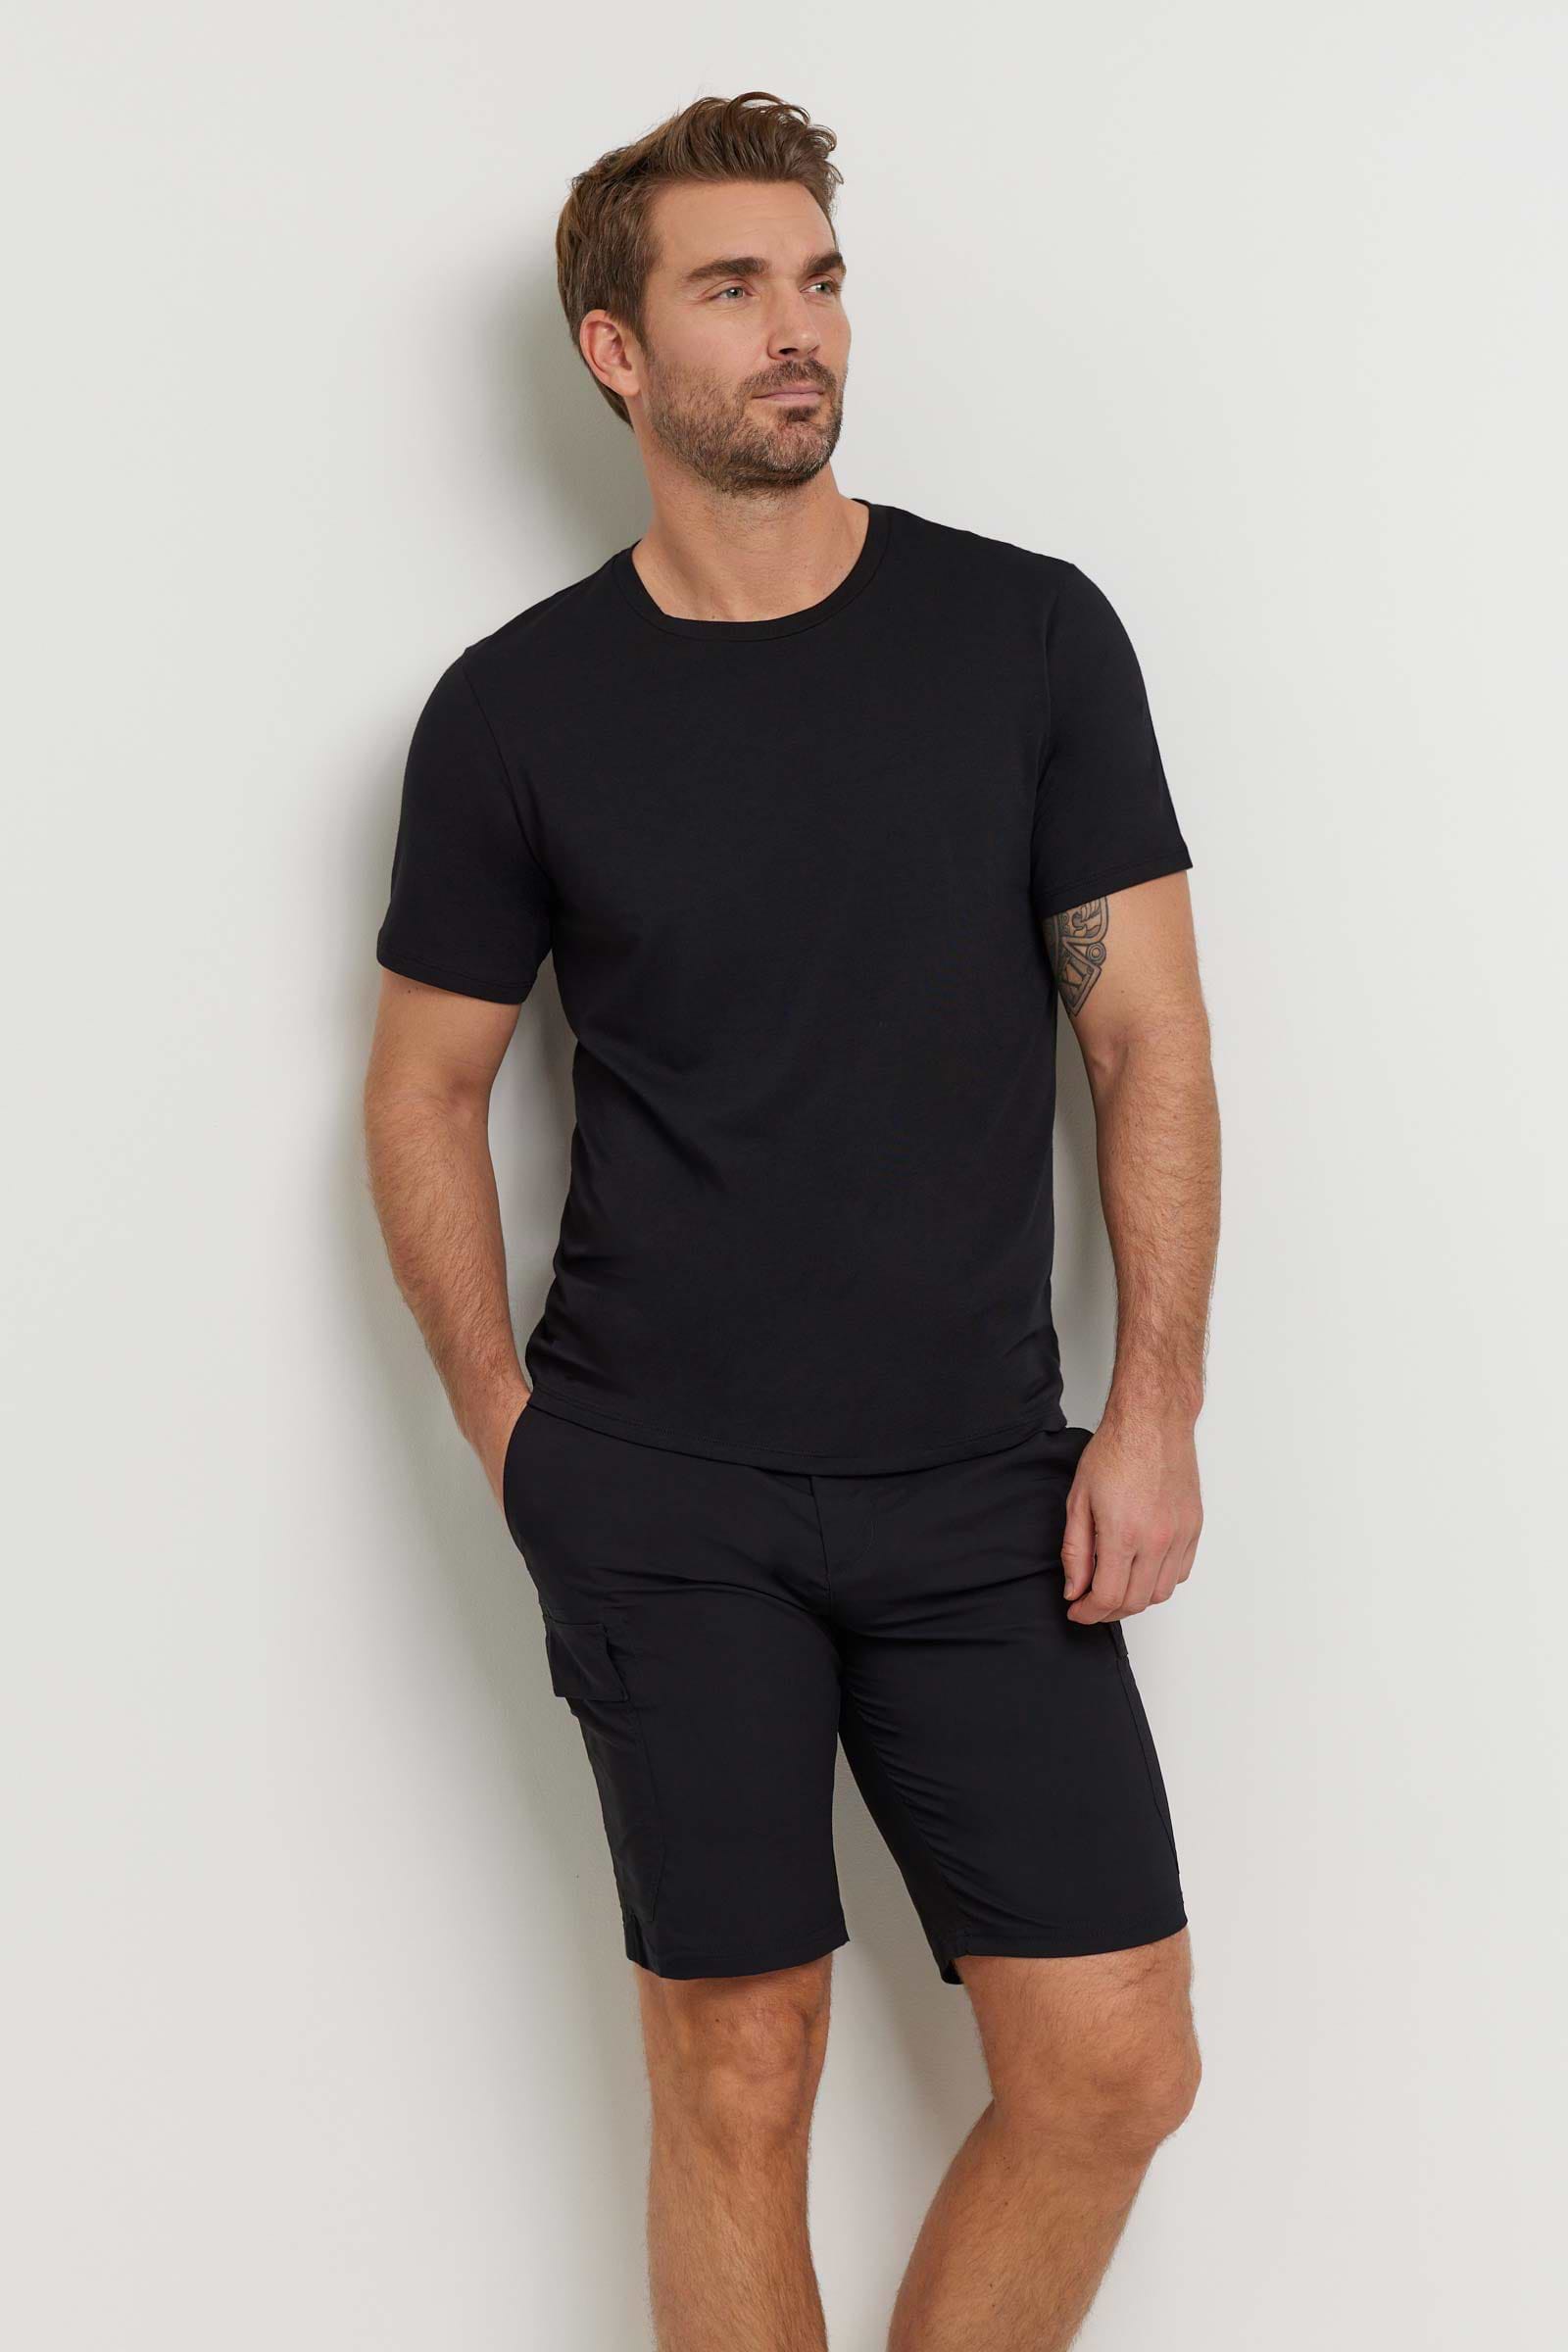 The Best Travel Top. Man Showing the Front Profile of a Men's Scott Top in Black.